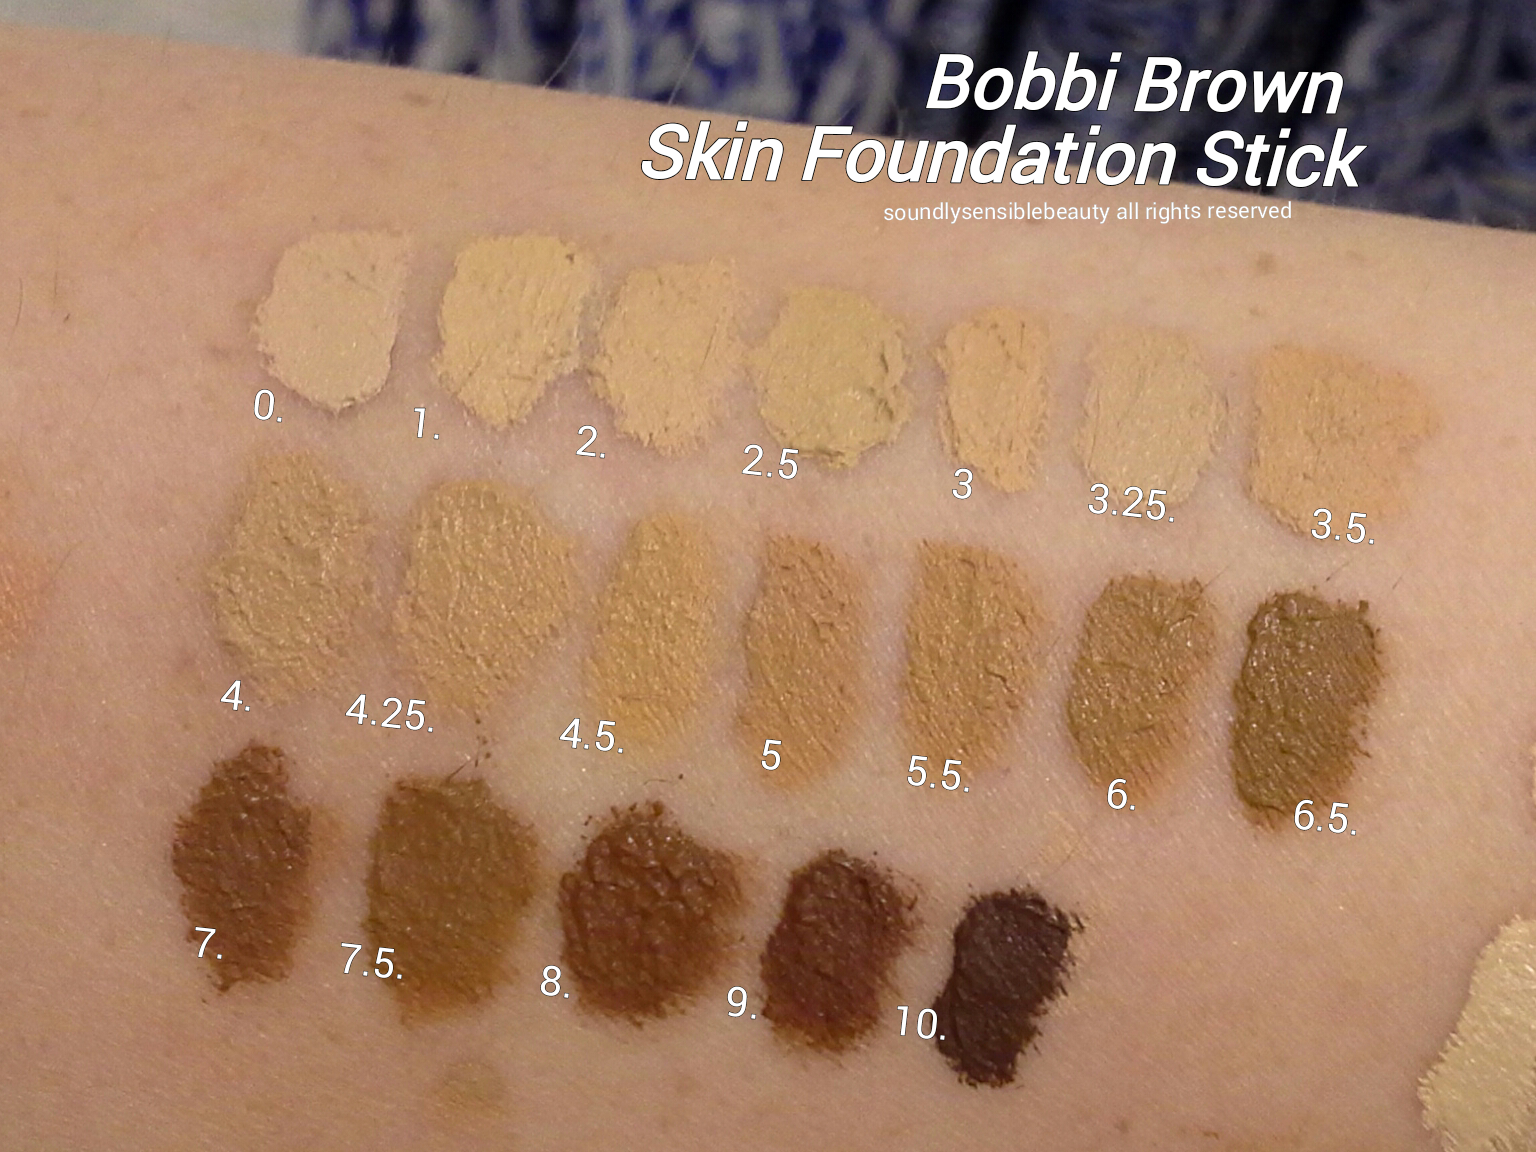 Bobbi Brown Skin Foundation Stick; Review & Swatches of Shades